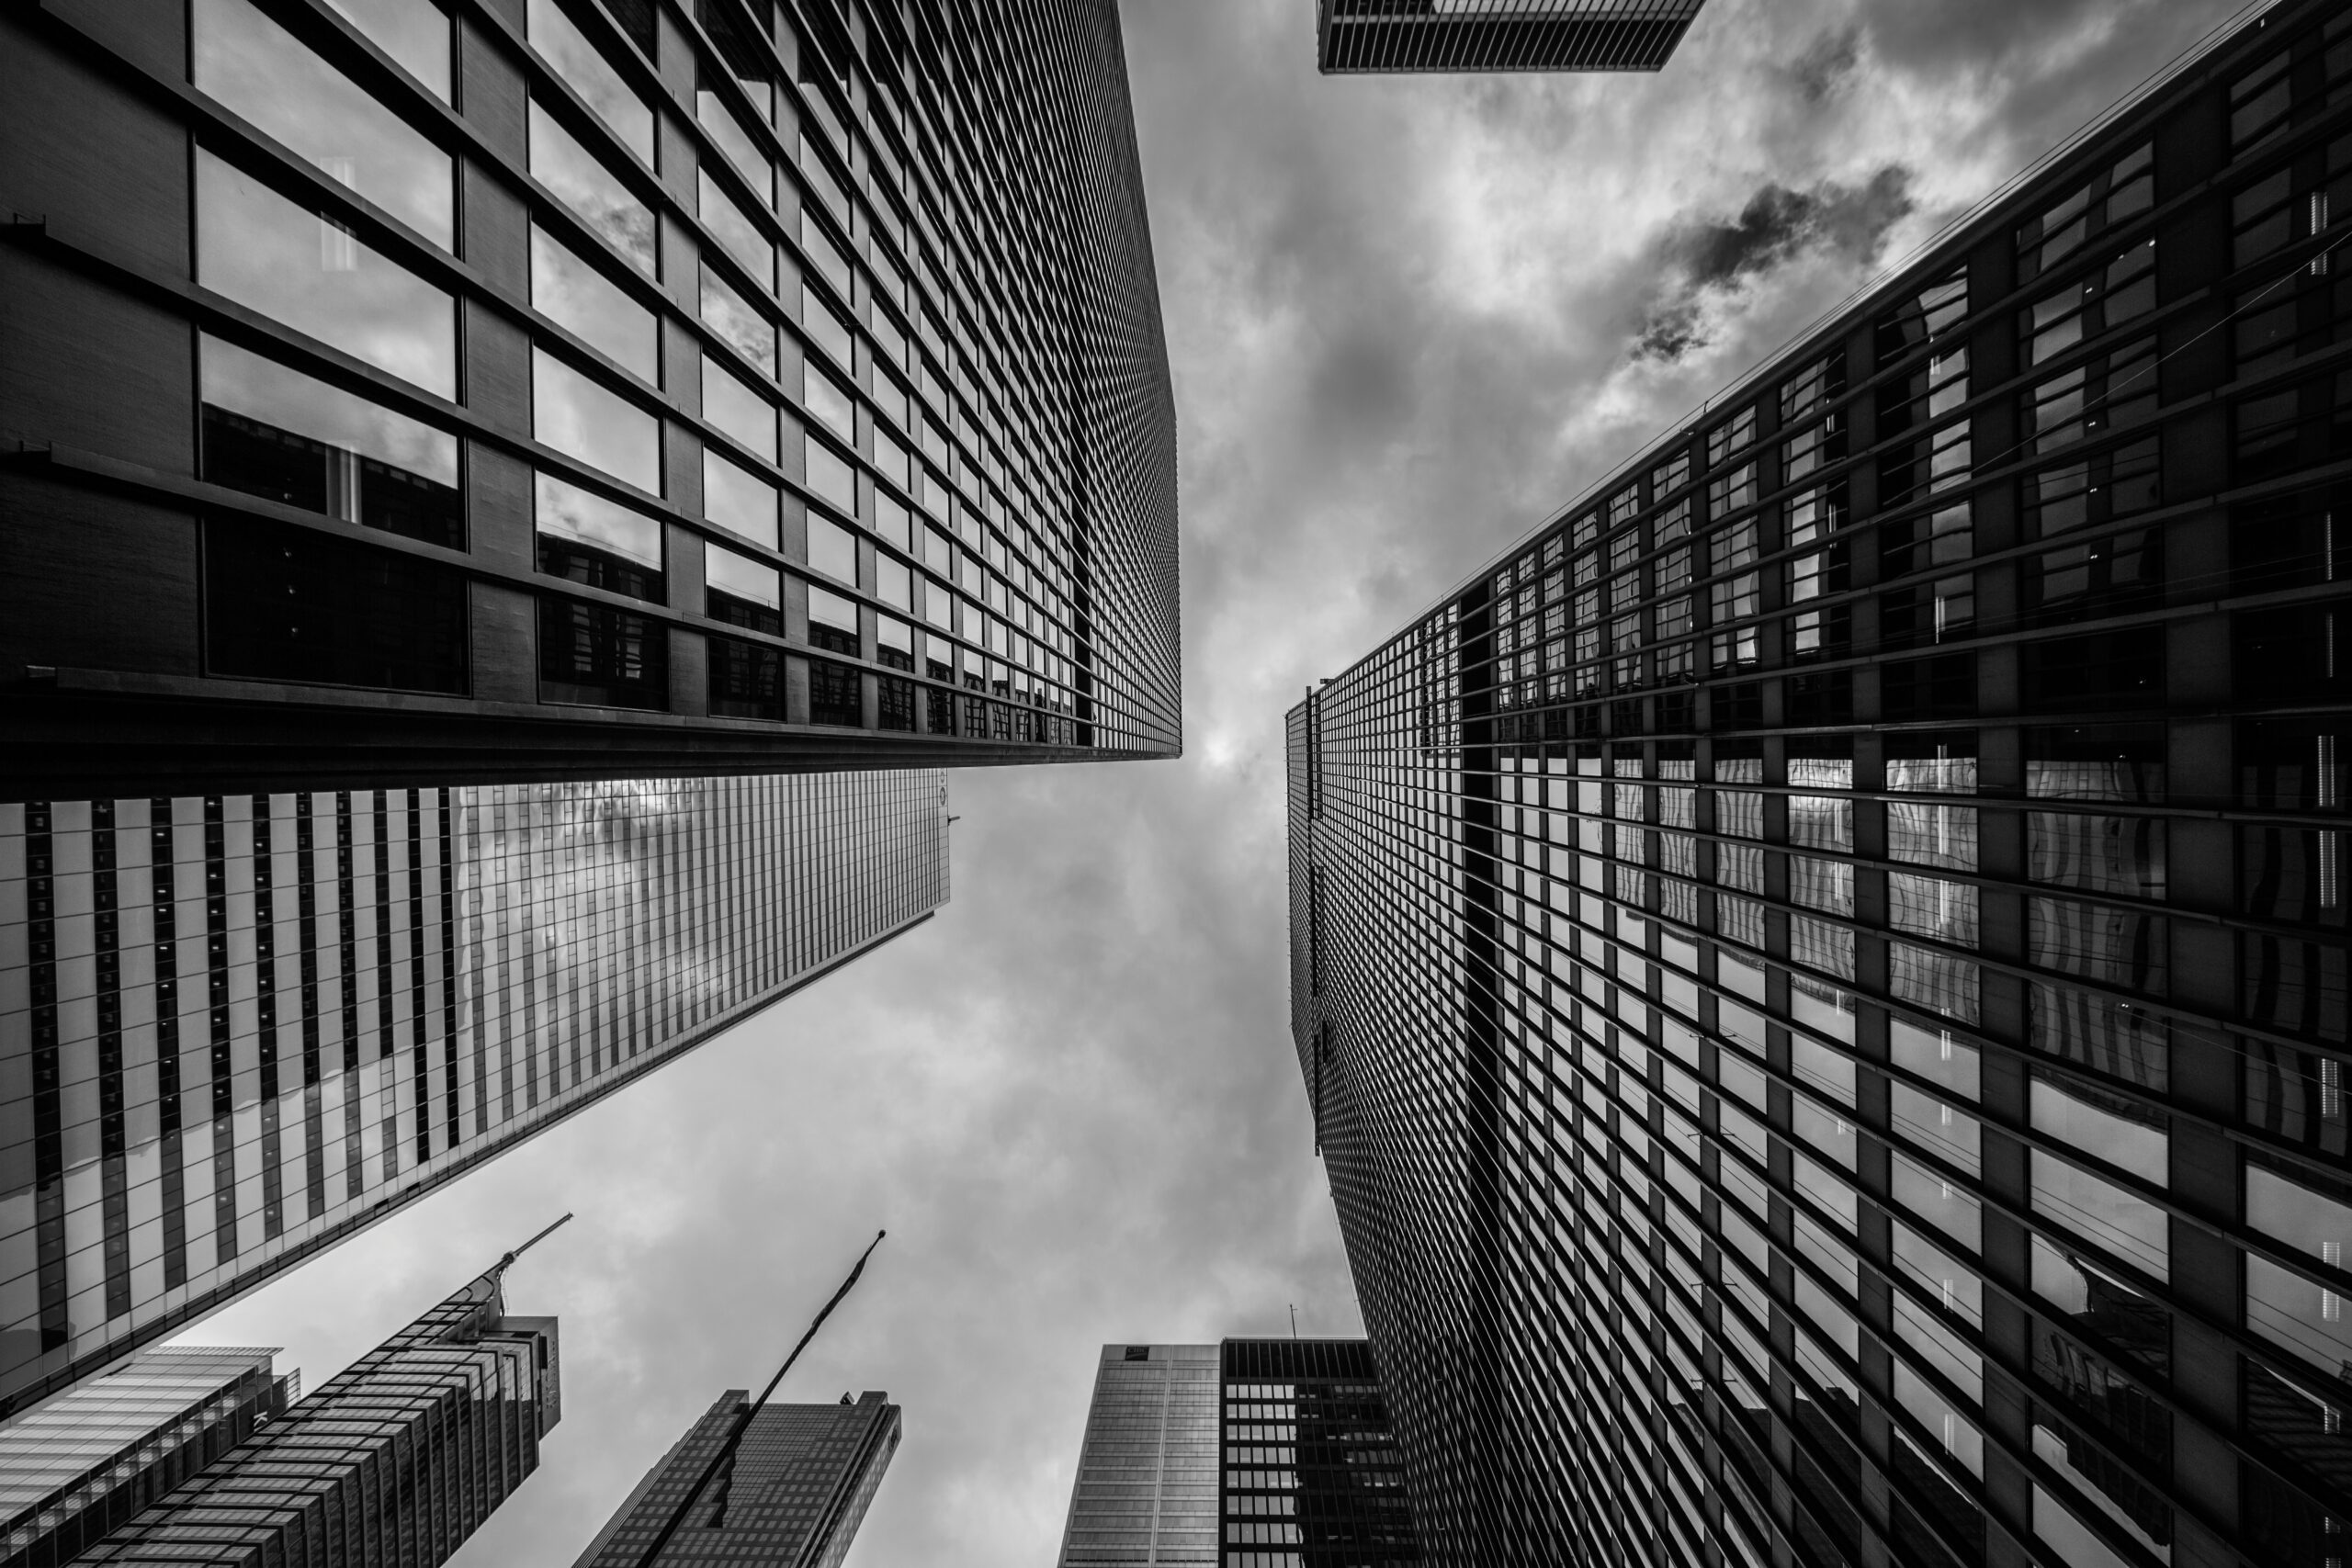 Smart Buildings and Smart Homes Trade Association Sponsors Multiple Investigations To Help Members Exploit New Technologies | B and W Buildings Sky Scrapers from Below | Case Study 5